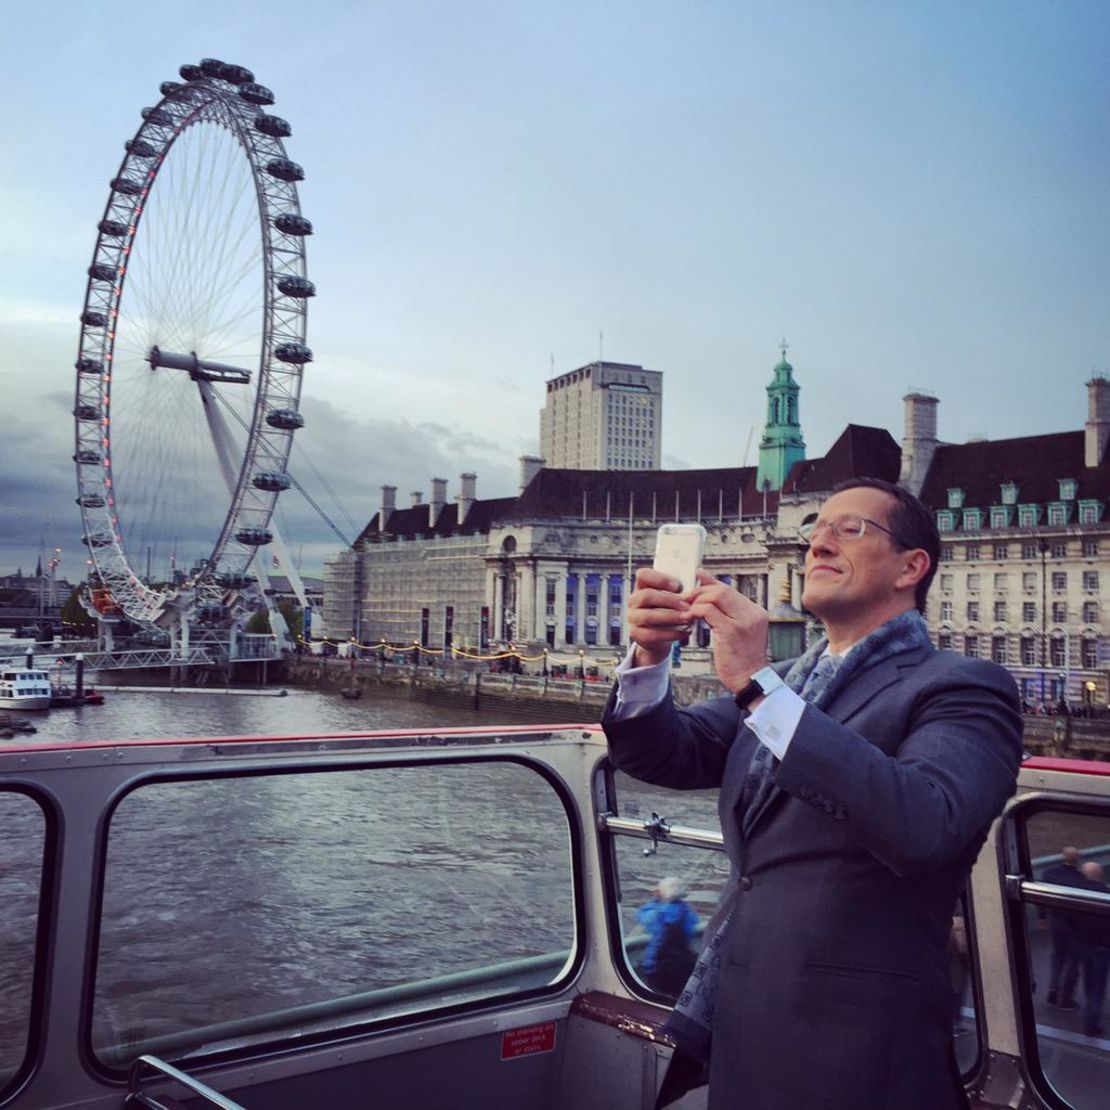 CNN's Richard Quest talks to viewers via Periscope on election night in London.